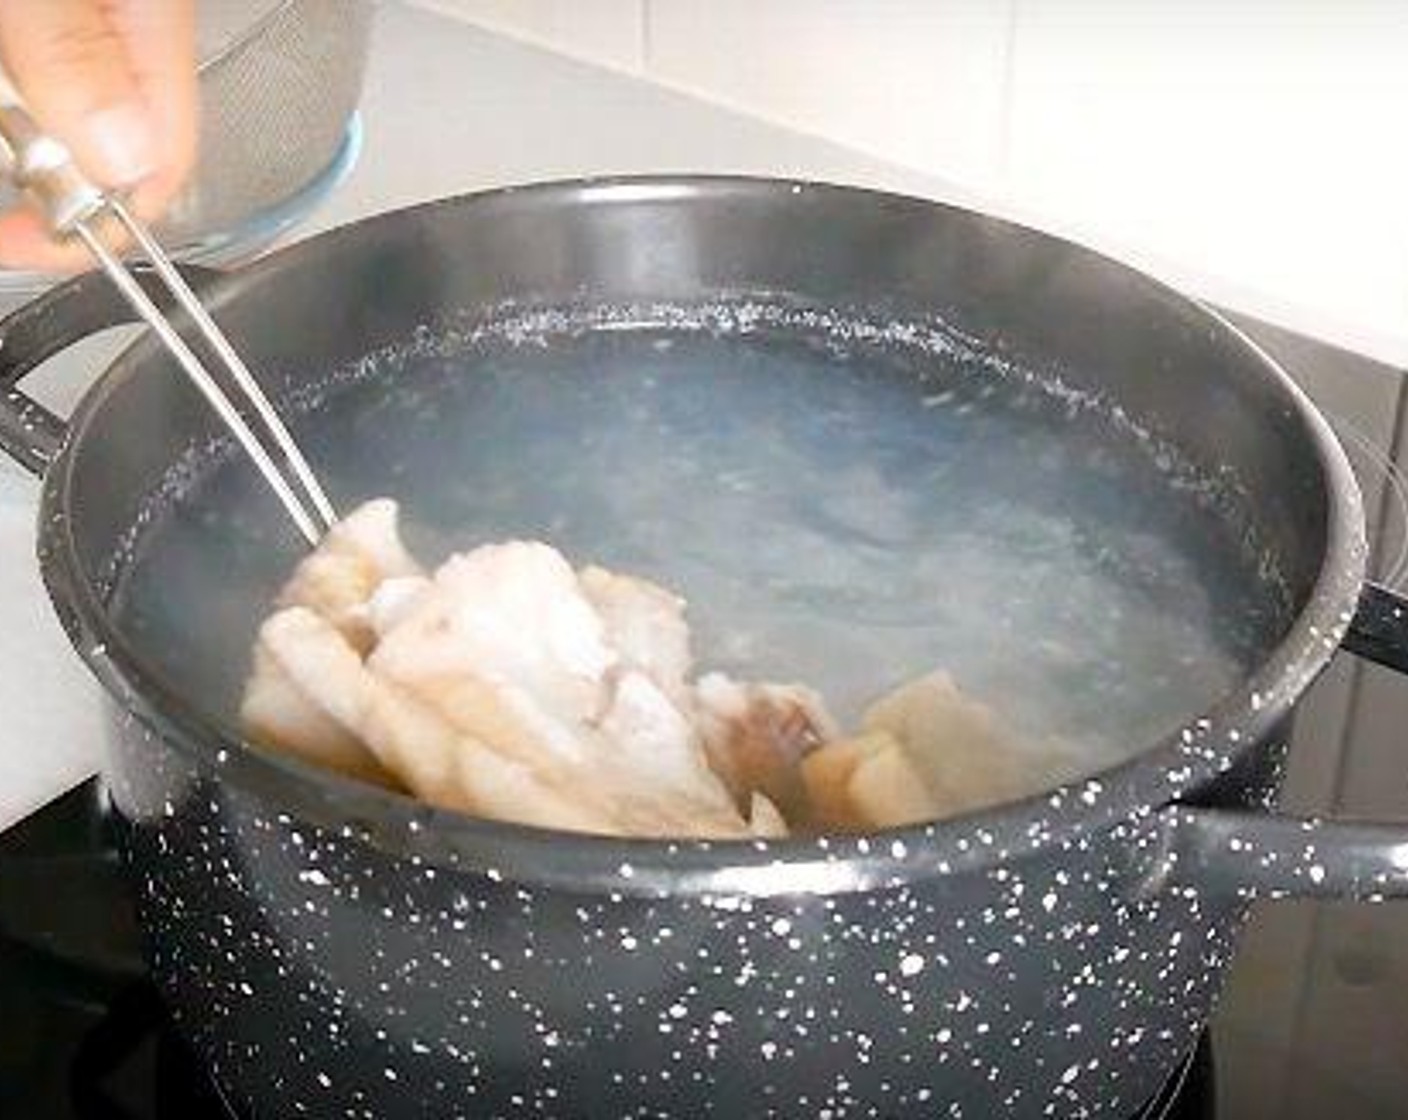 step 2 To a pot of boiling water seasoned with Salt (to taste) add the White Fish Fillets (1.1 lb) and cook for 5 minutes. Then remove and leave to drain in a colander.